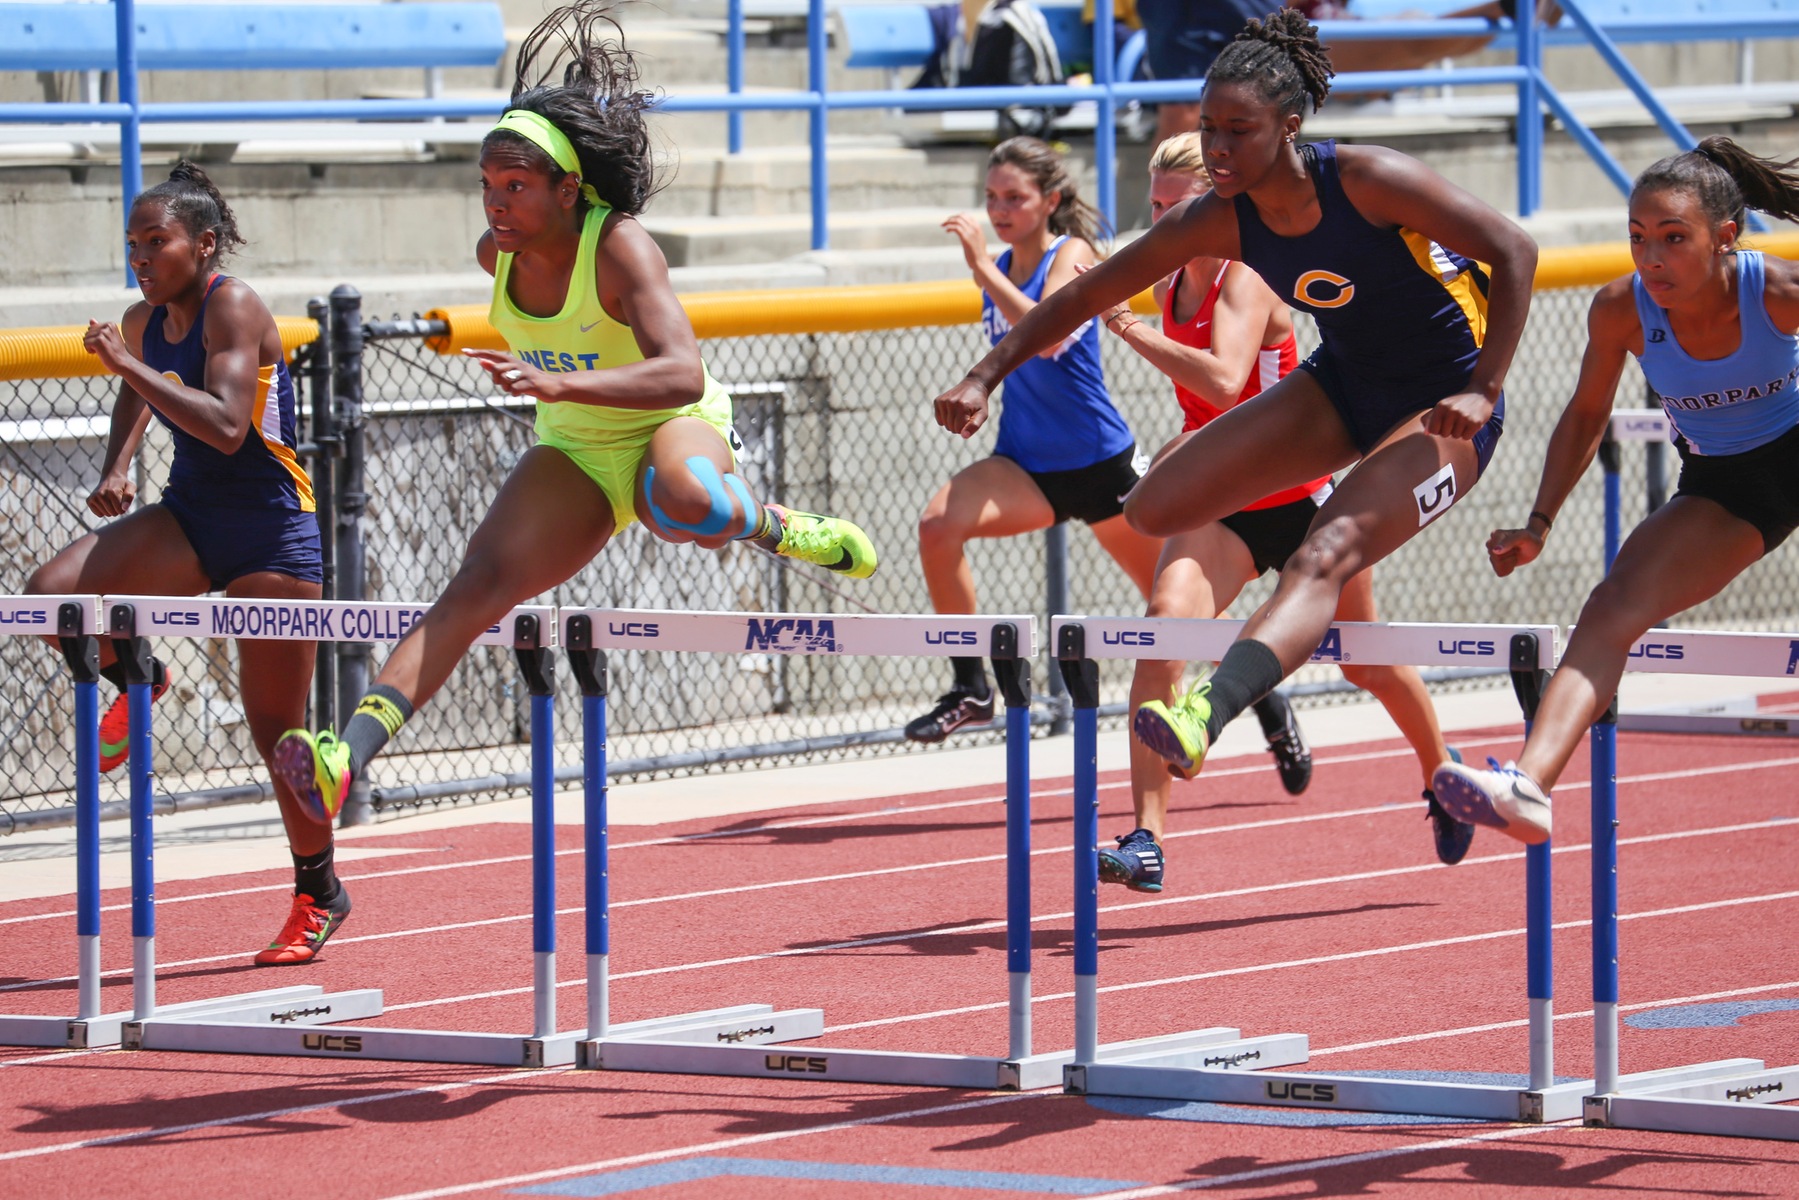 Canyons Track & Field Headed to CCCAA State Championship Meet